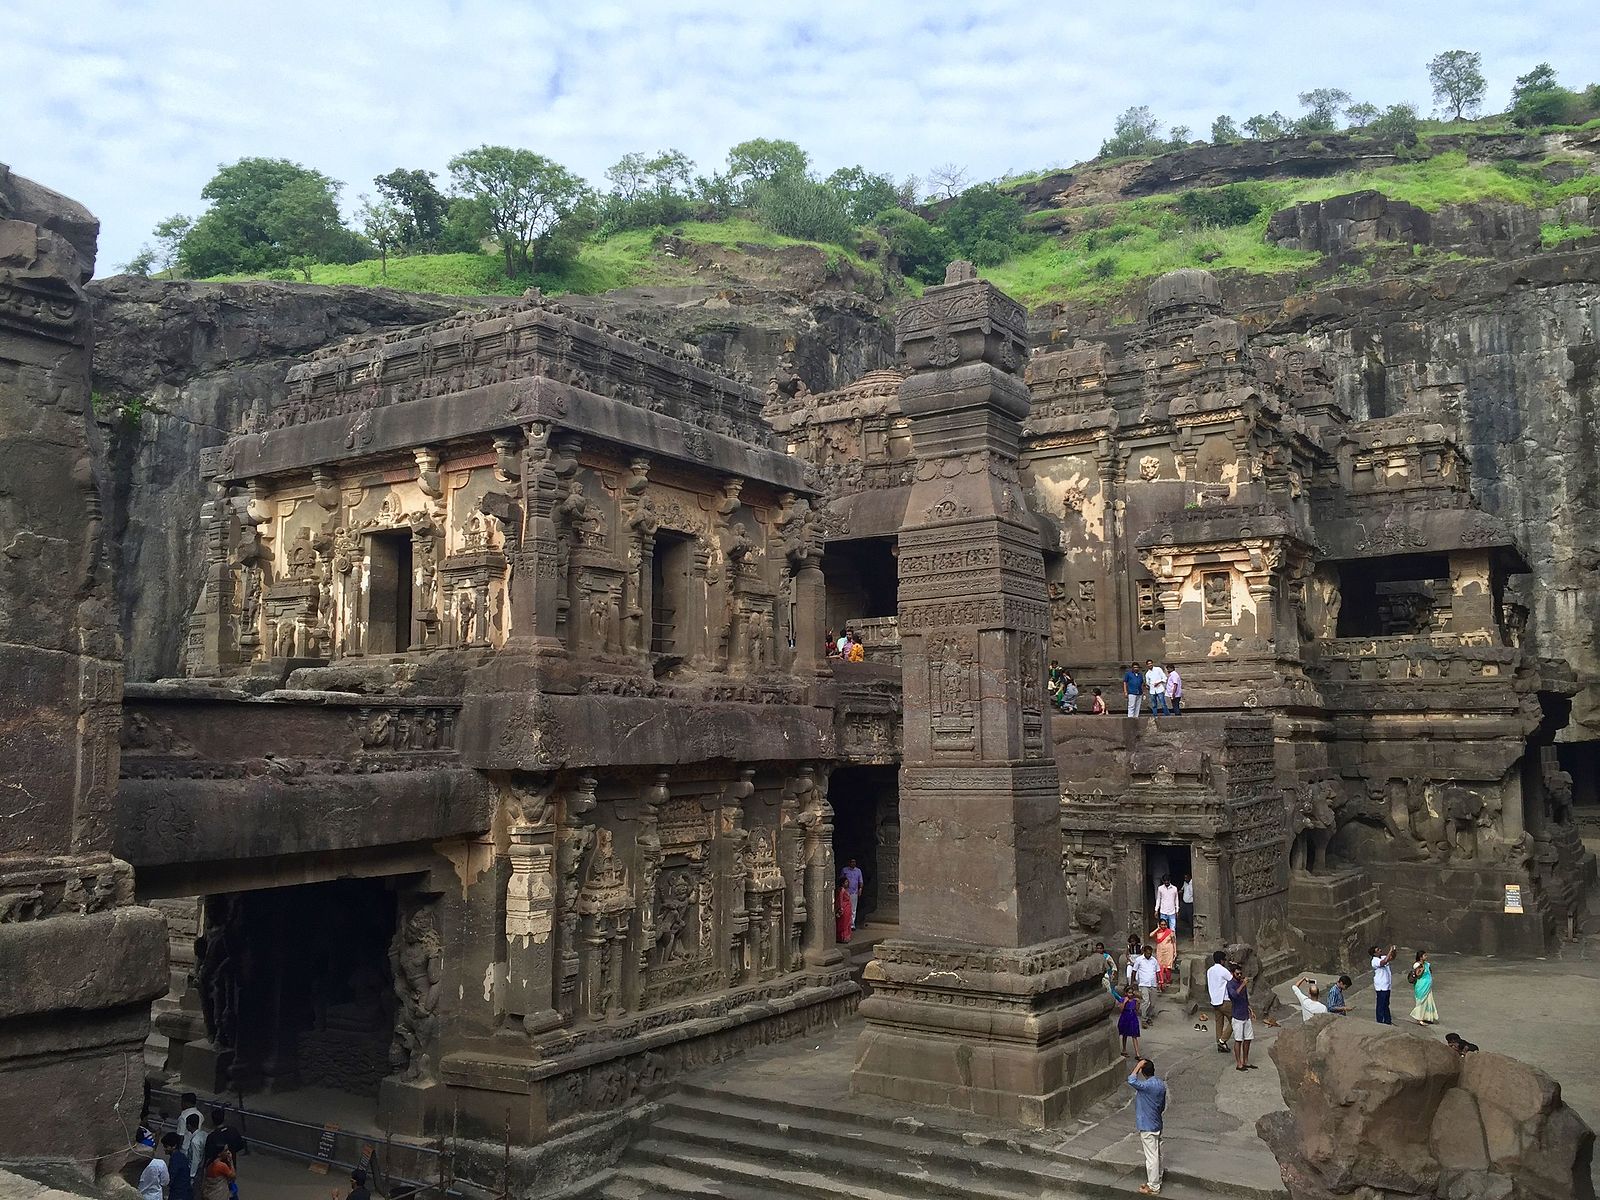 The Kailasa Temple (Cave 16) is the largest of the rock-cut Hindu temples at the Ellora Caves in India. (Photo: Wikimedia Commons/Ms Sarah Welch)